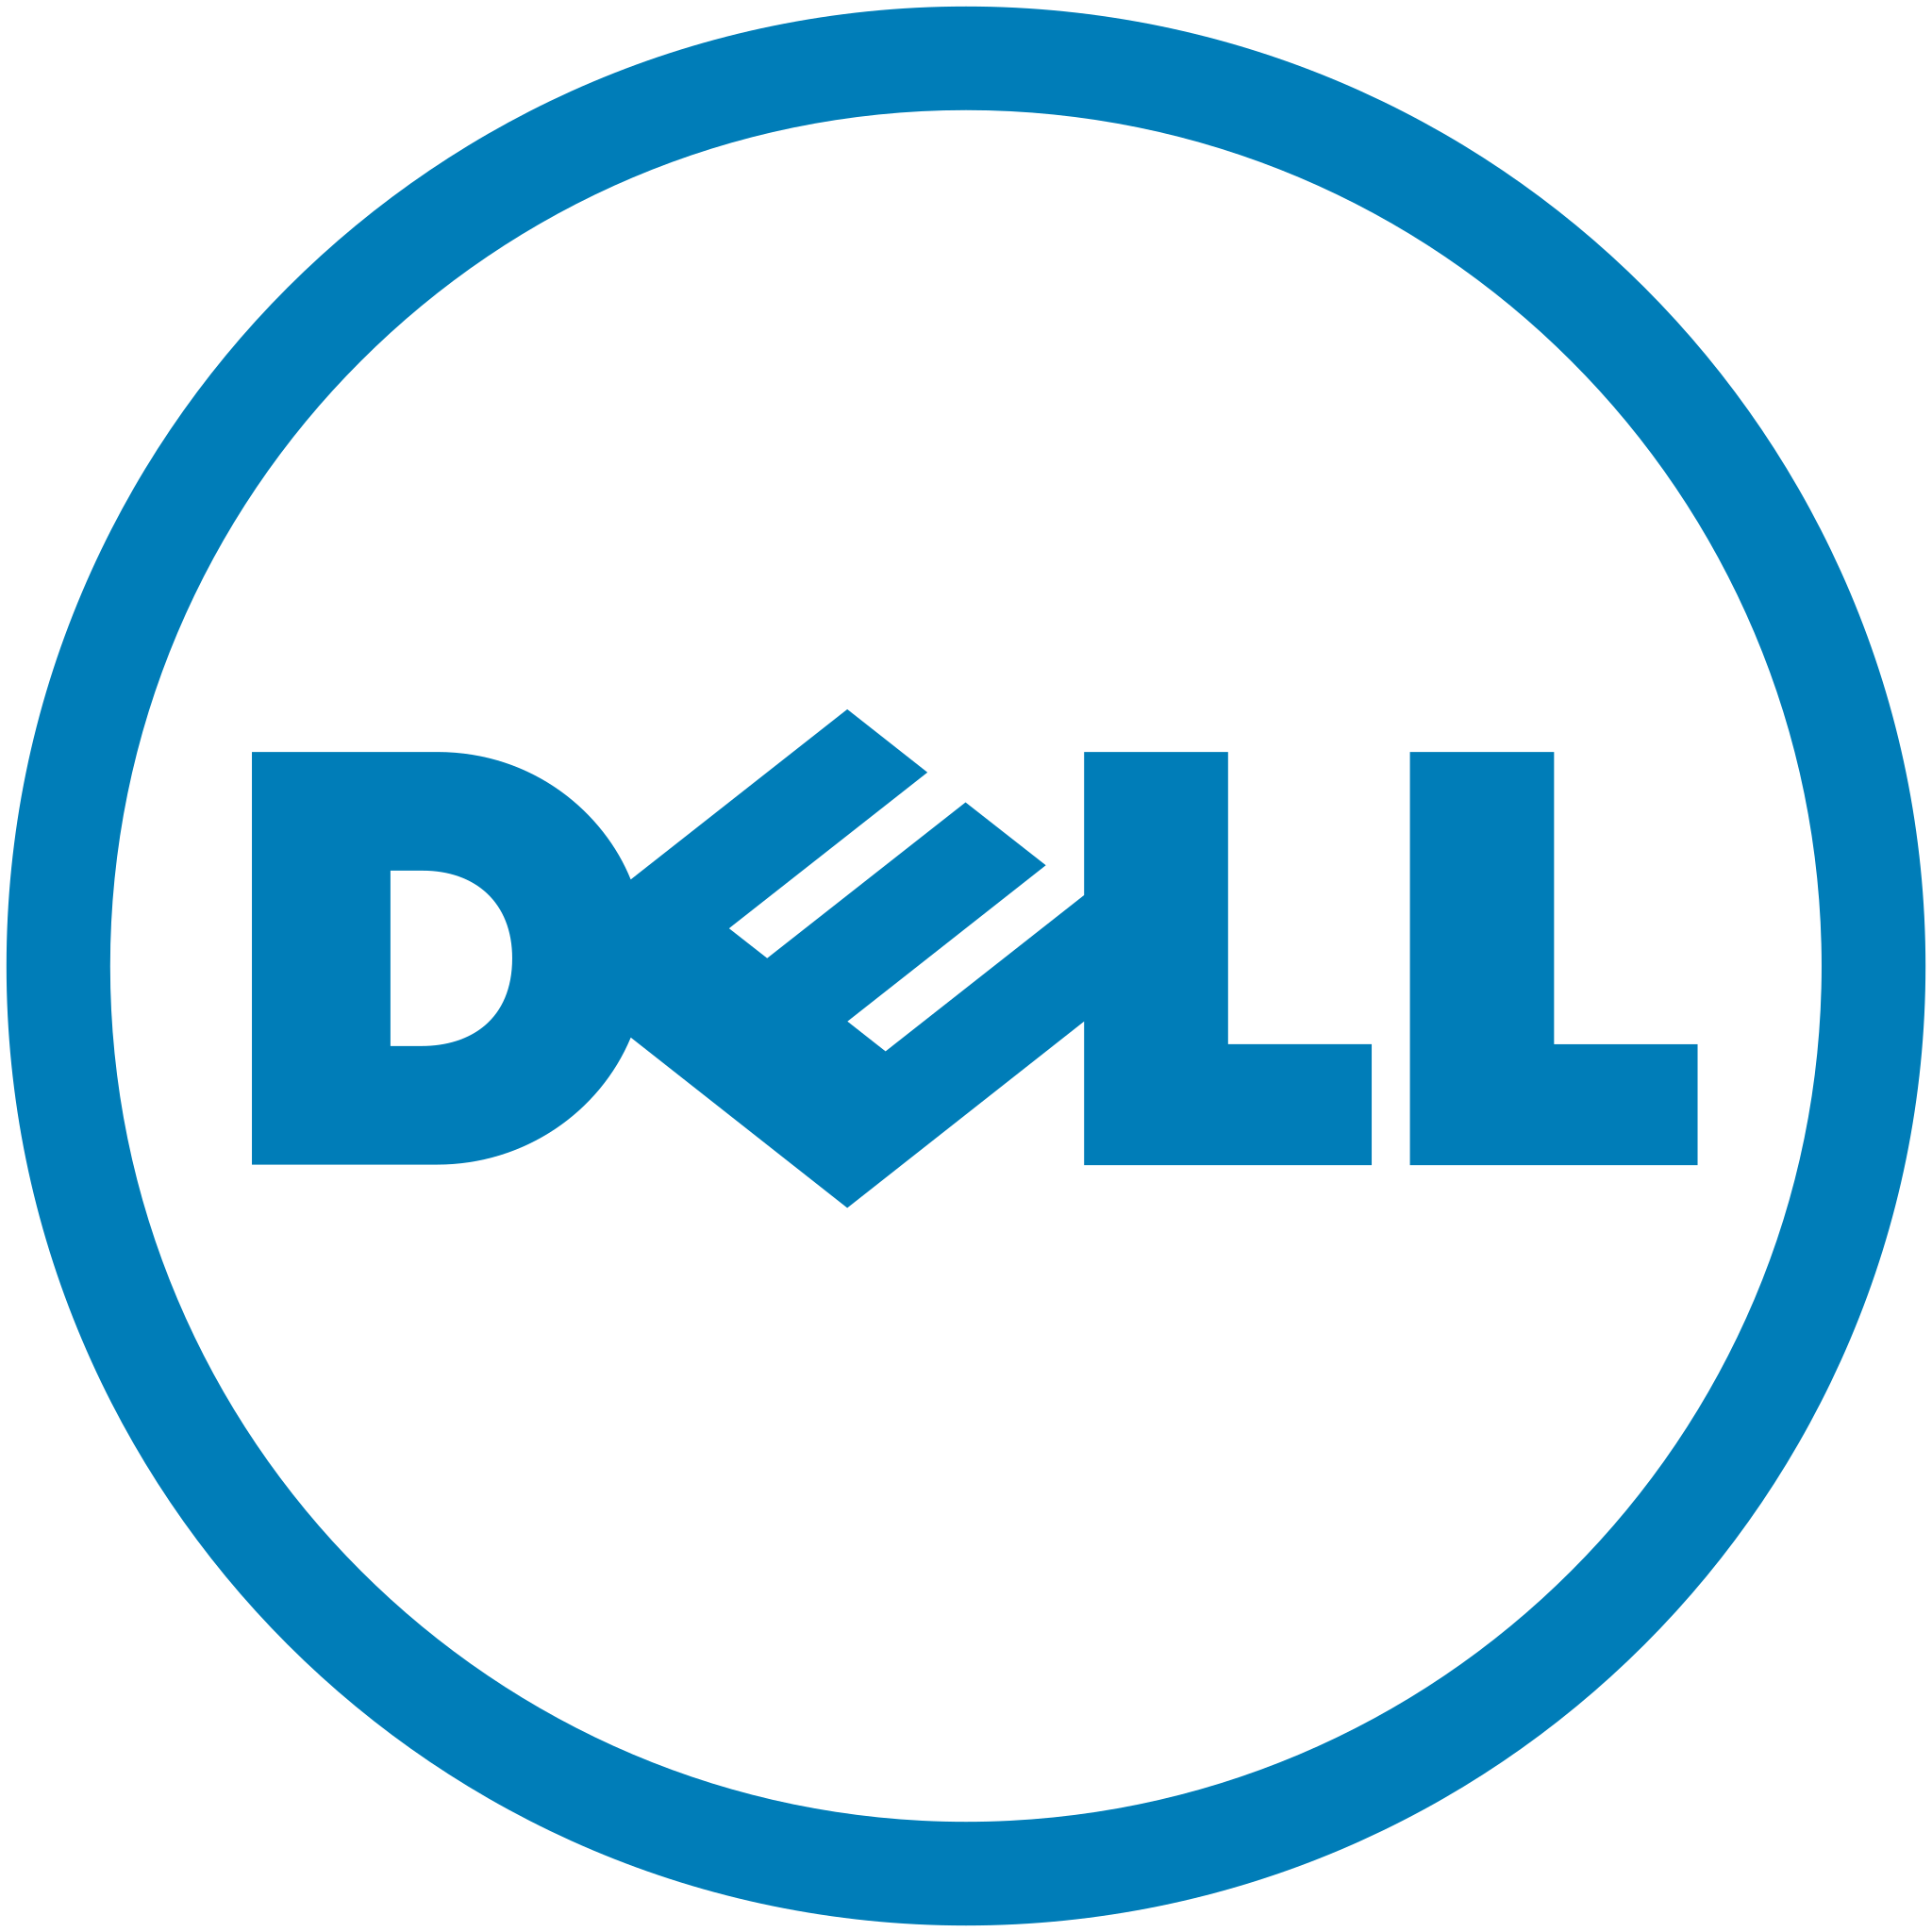 dell_logo-1674066807.png